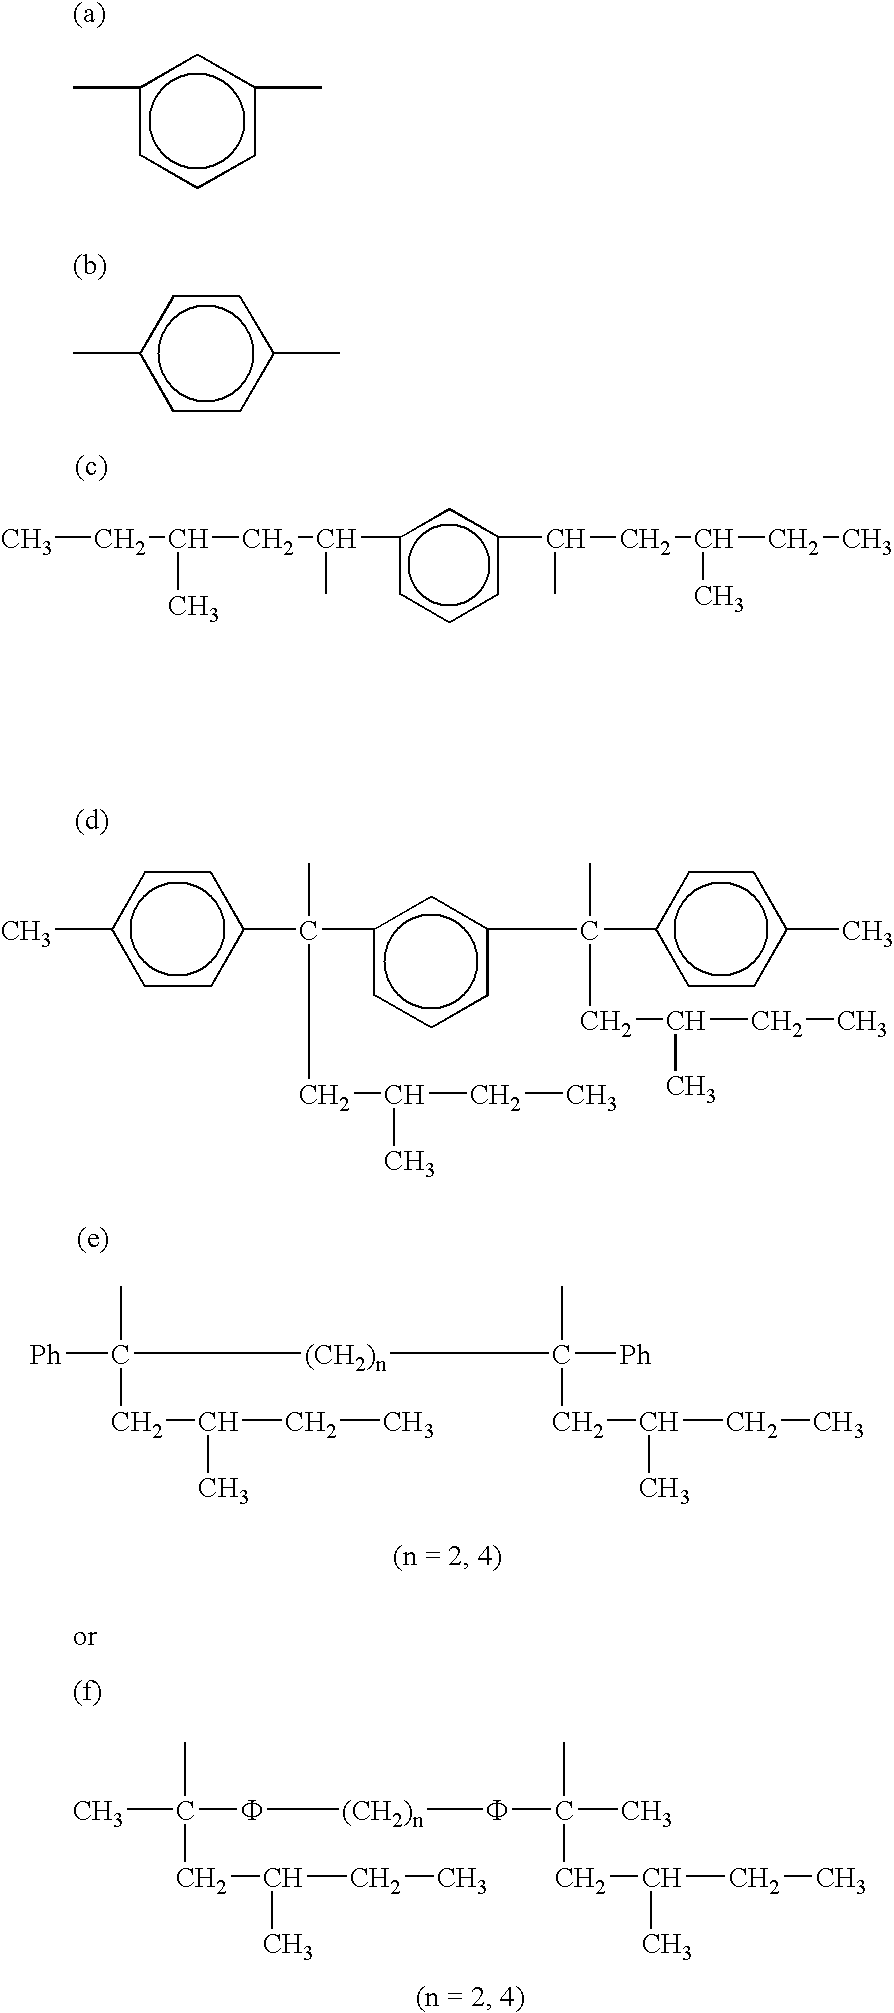 Tin-containing organolithium compounds and preparation thereof